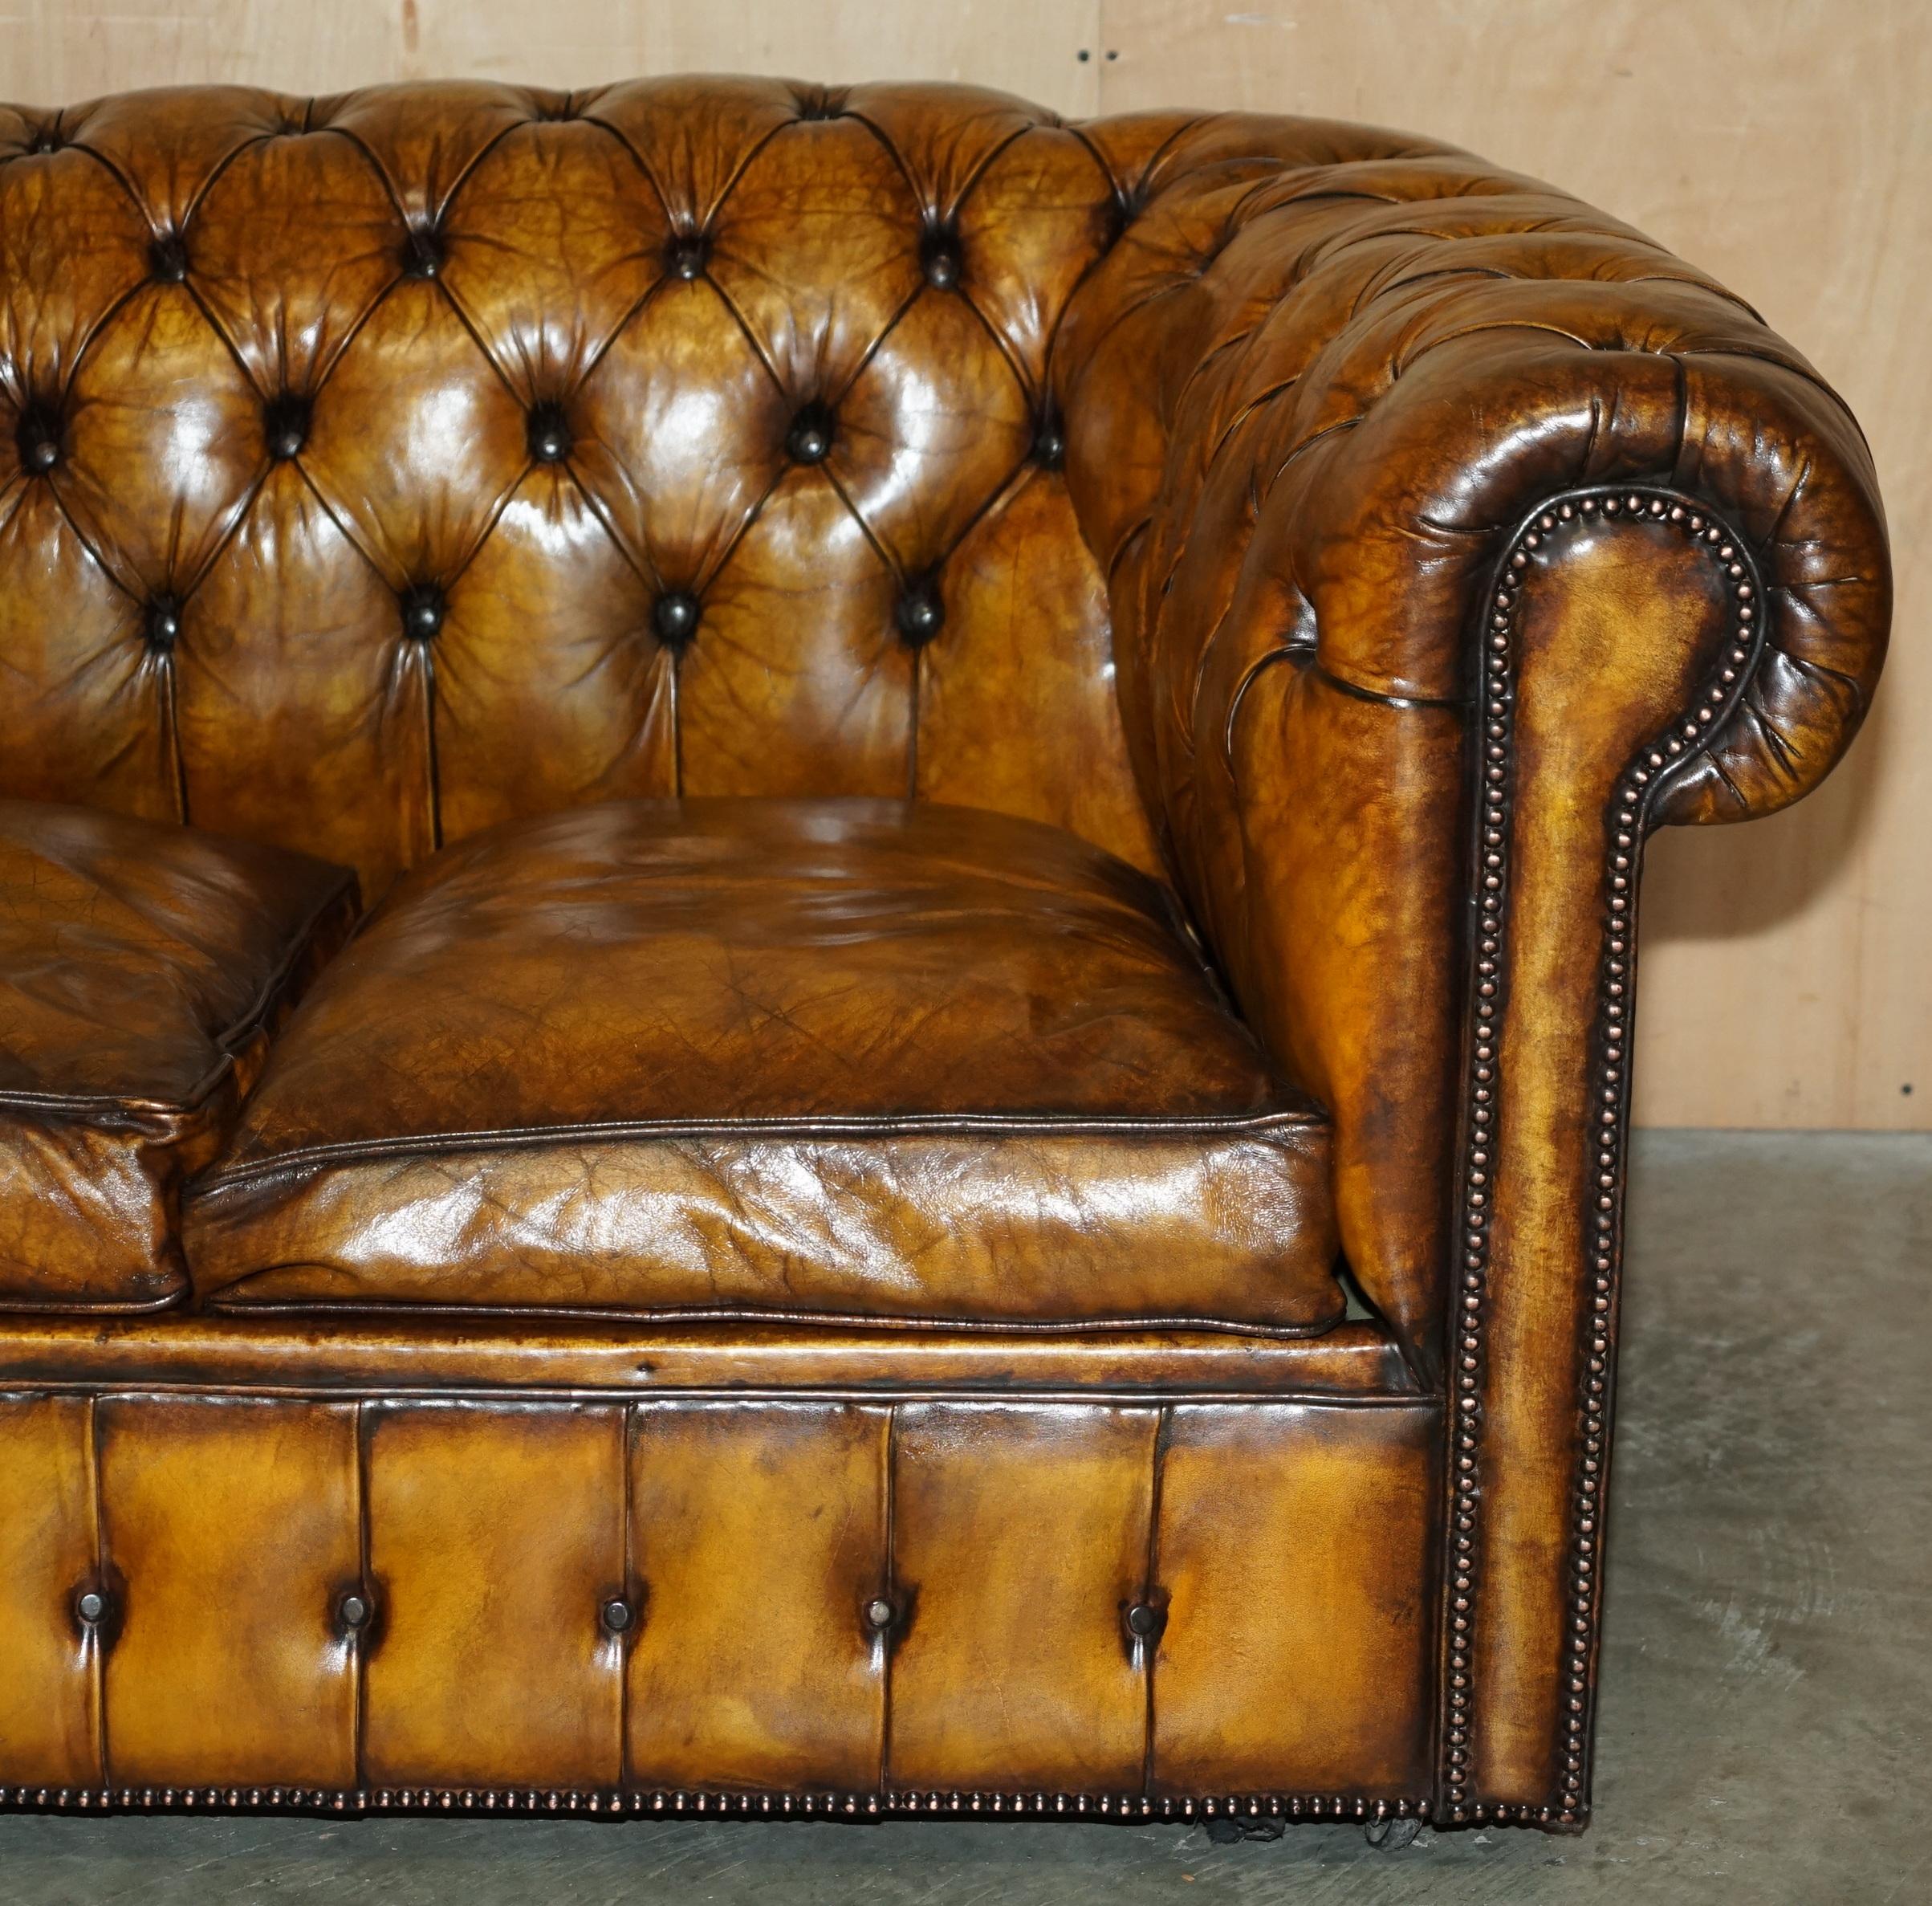 SUPER RARE FULLY RESTORED VINTAGE CIGAR BROWN LEATHER CHESTERFiELD SOFA BED For Sale 1